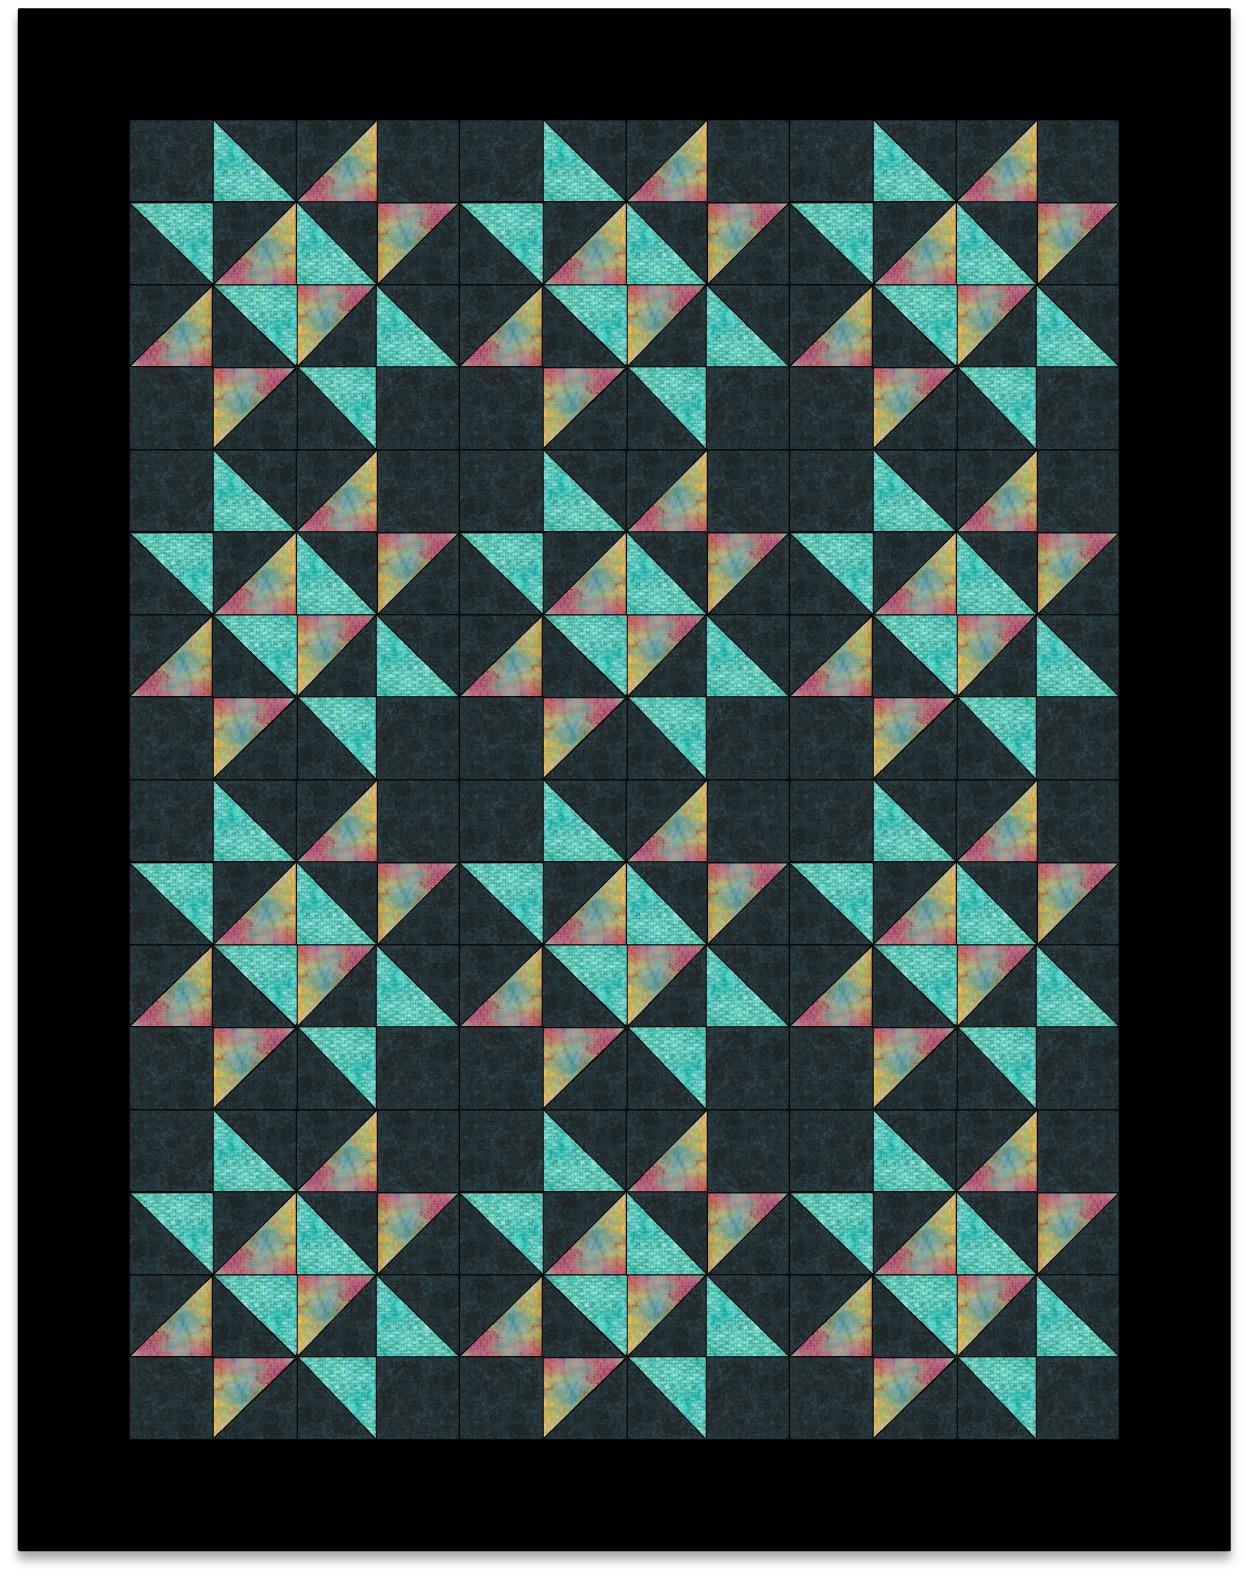 Quiltblox - Over and Under - Savannah - Colorway 1